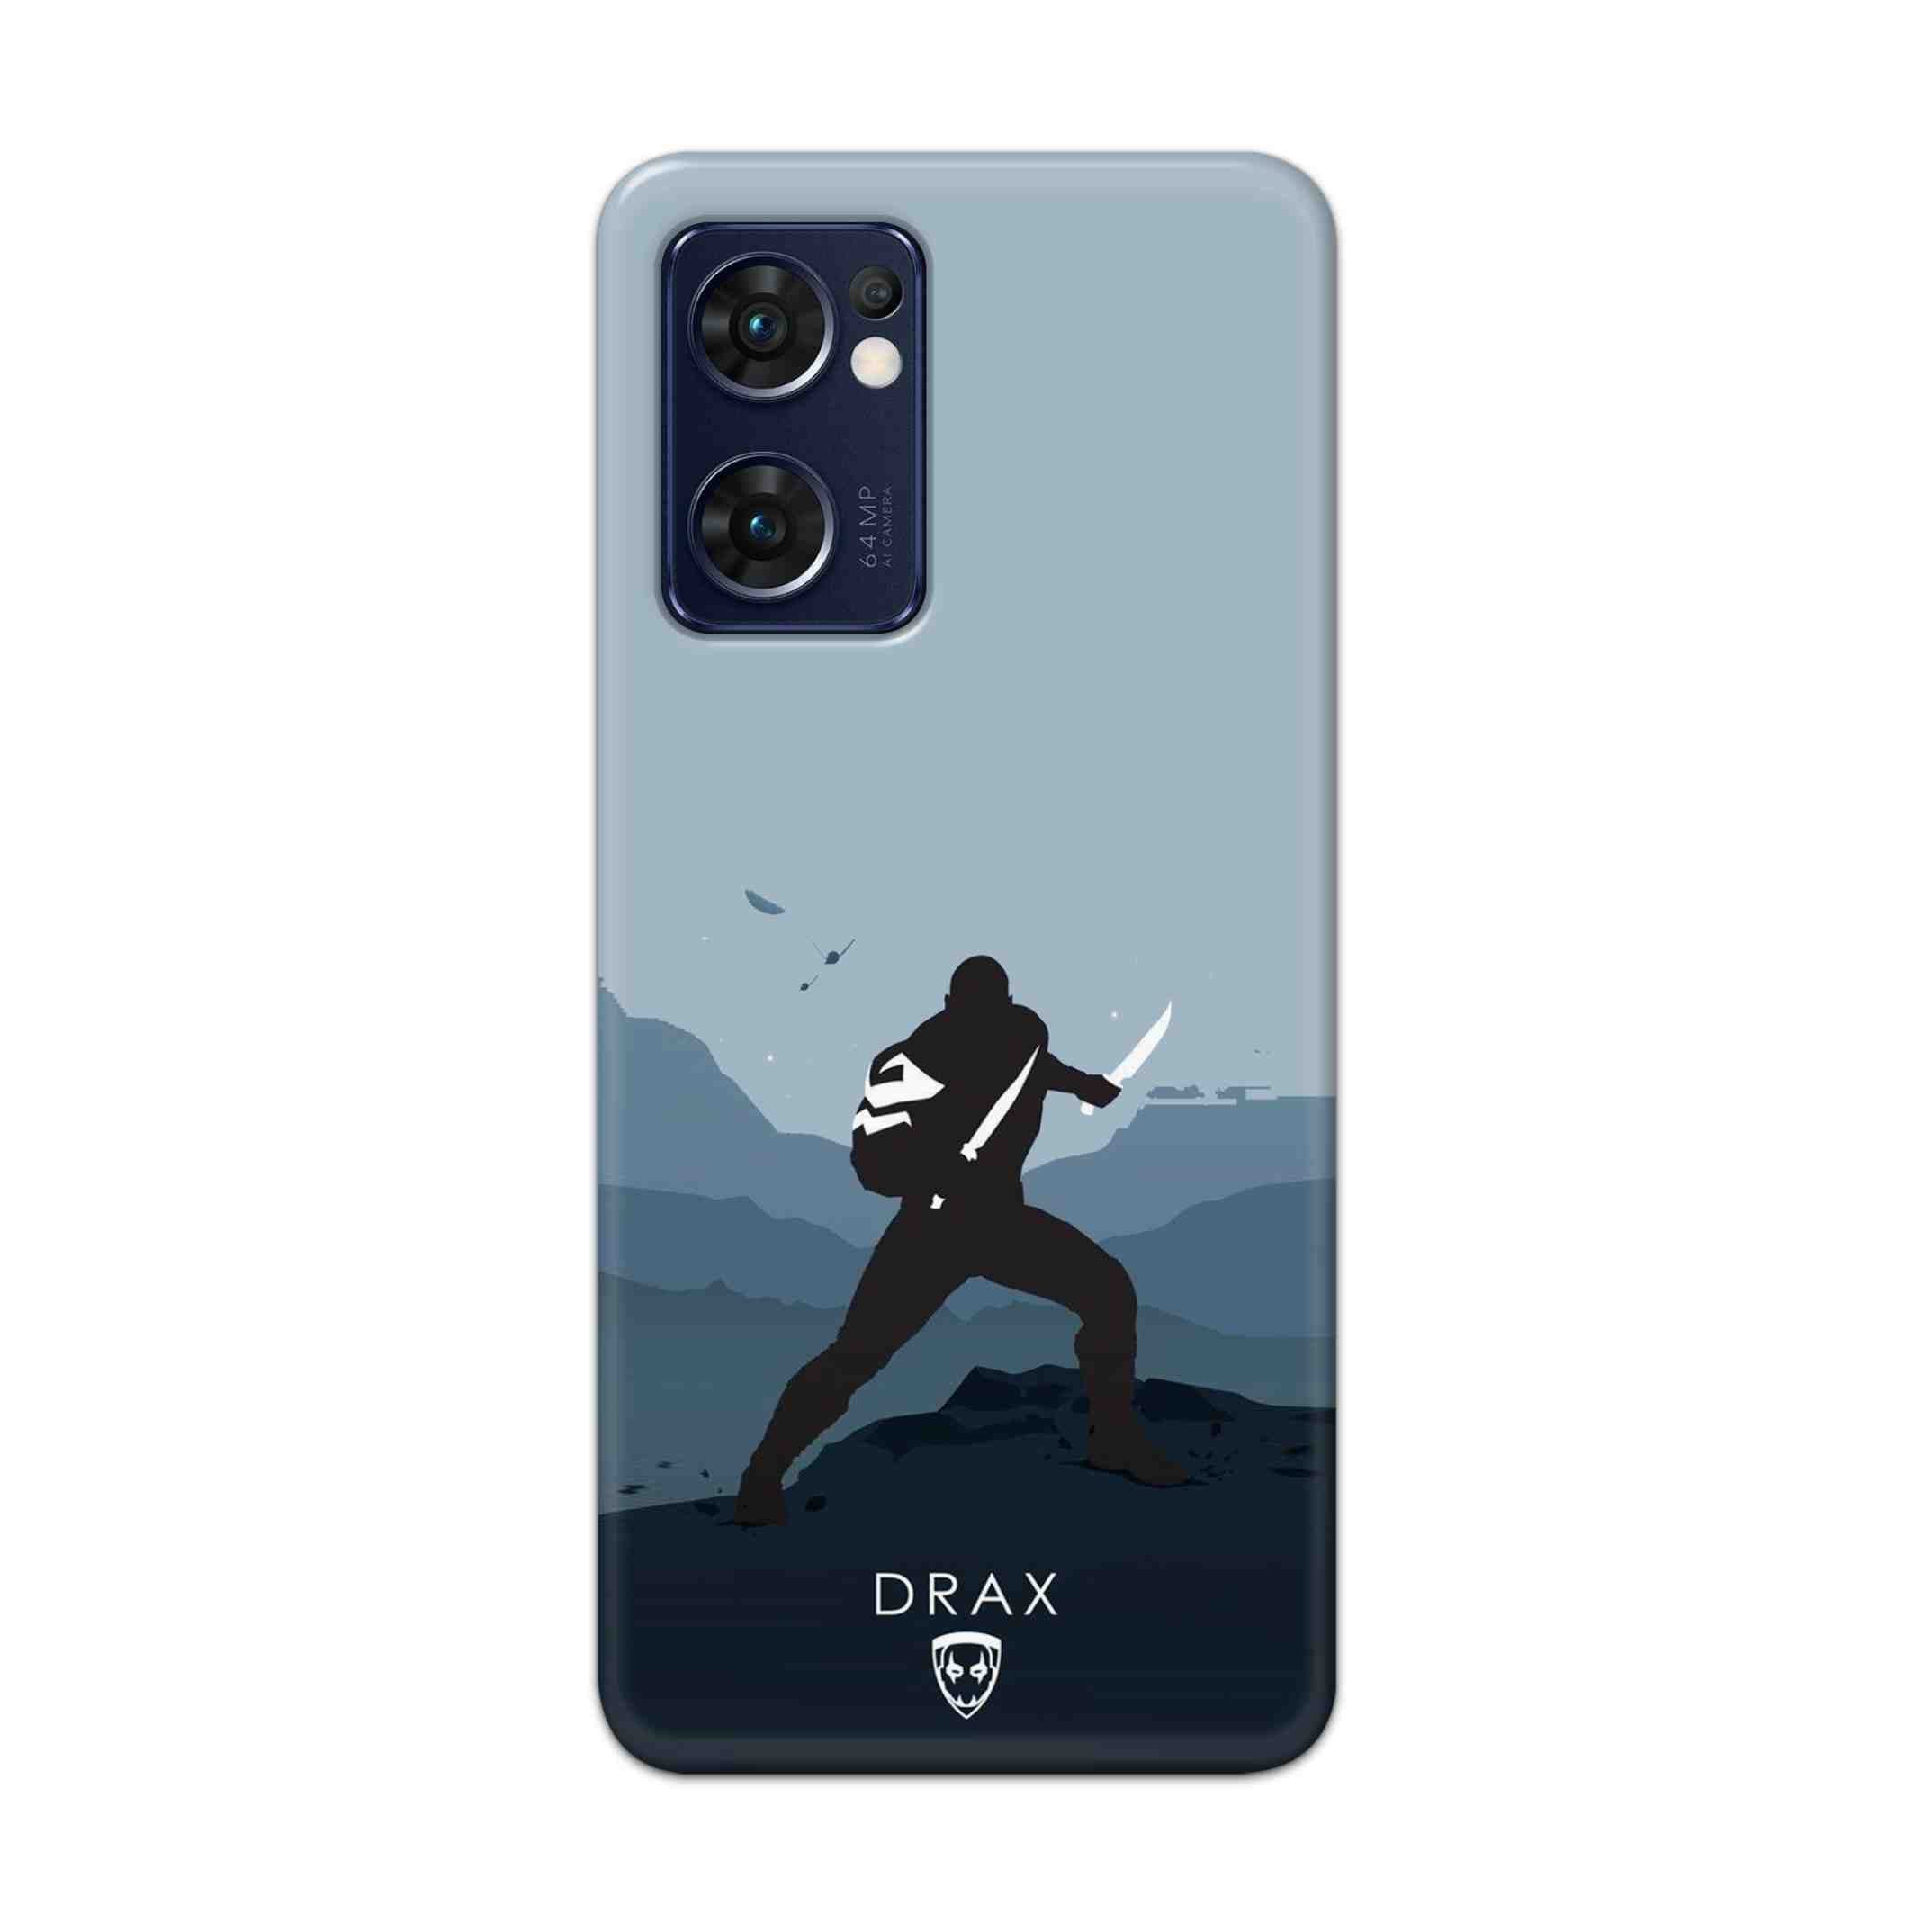 Buy Drax Hard Back Mobile Phone Case Cover For Reno 7 5G Online